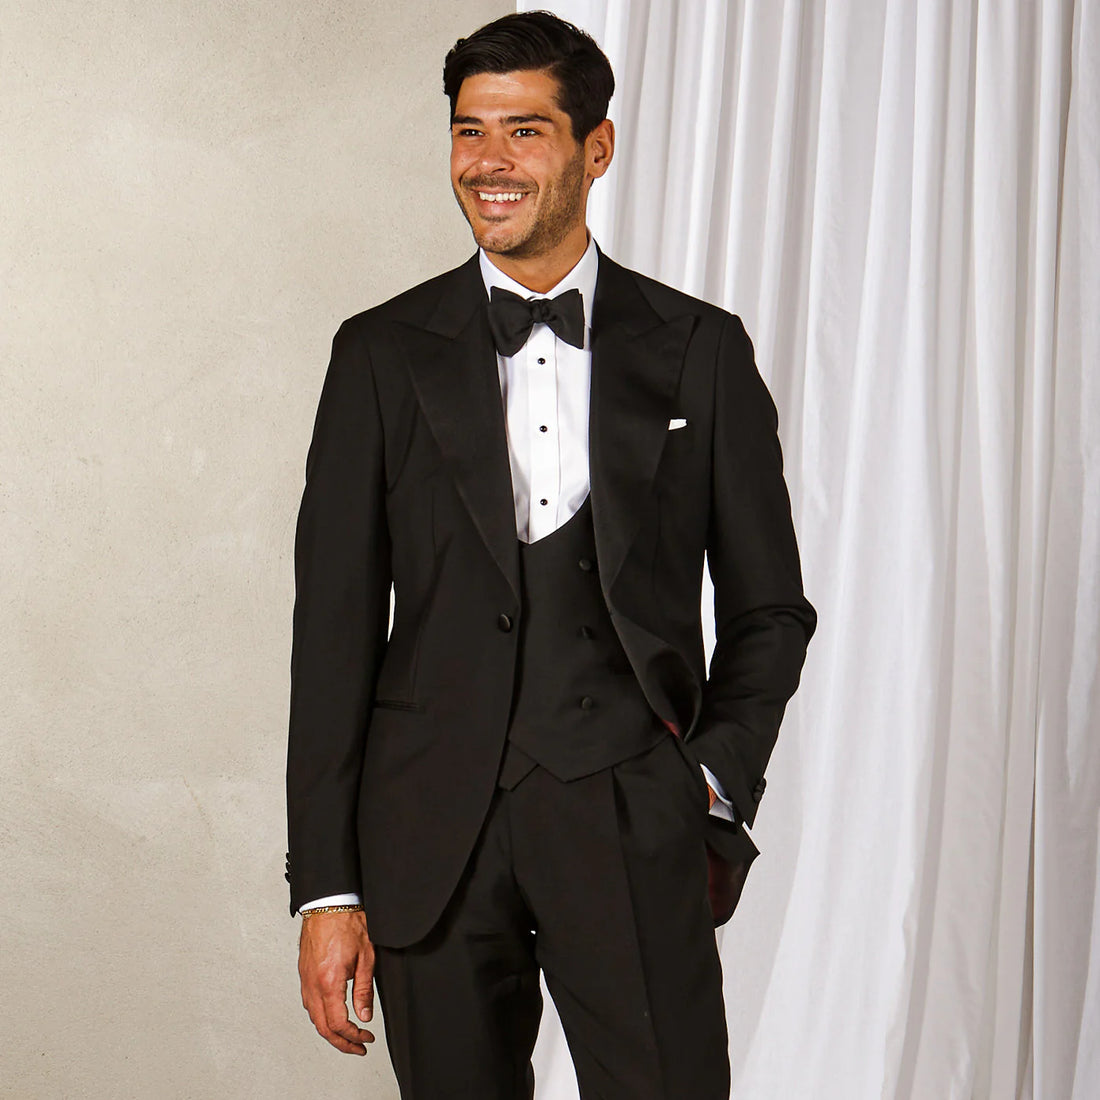 A smiling man in a classic black tuxedo with a bow tie standing against a cream-colored backdrop.